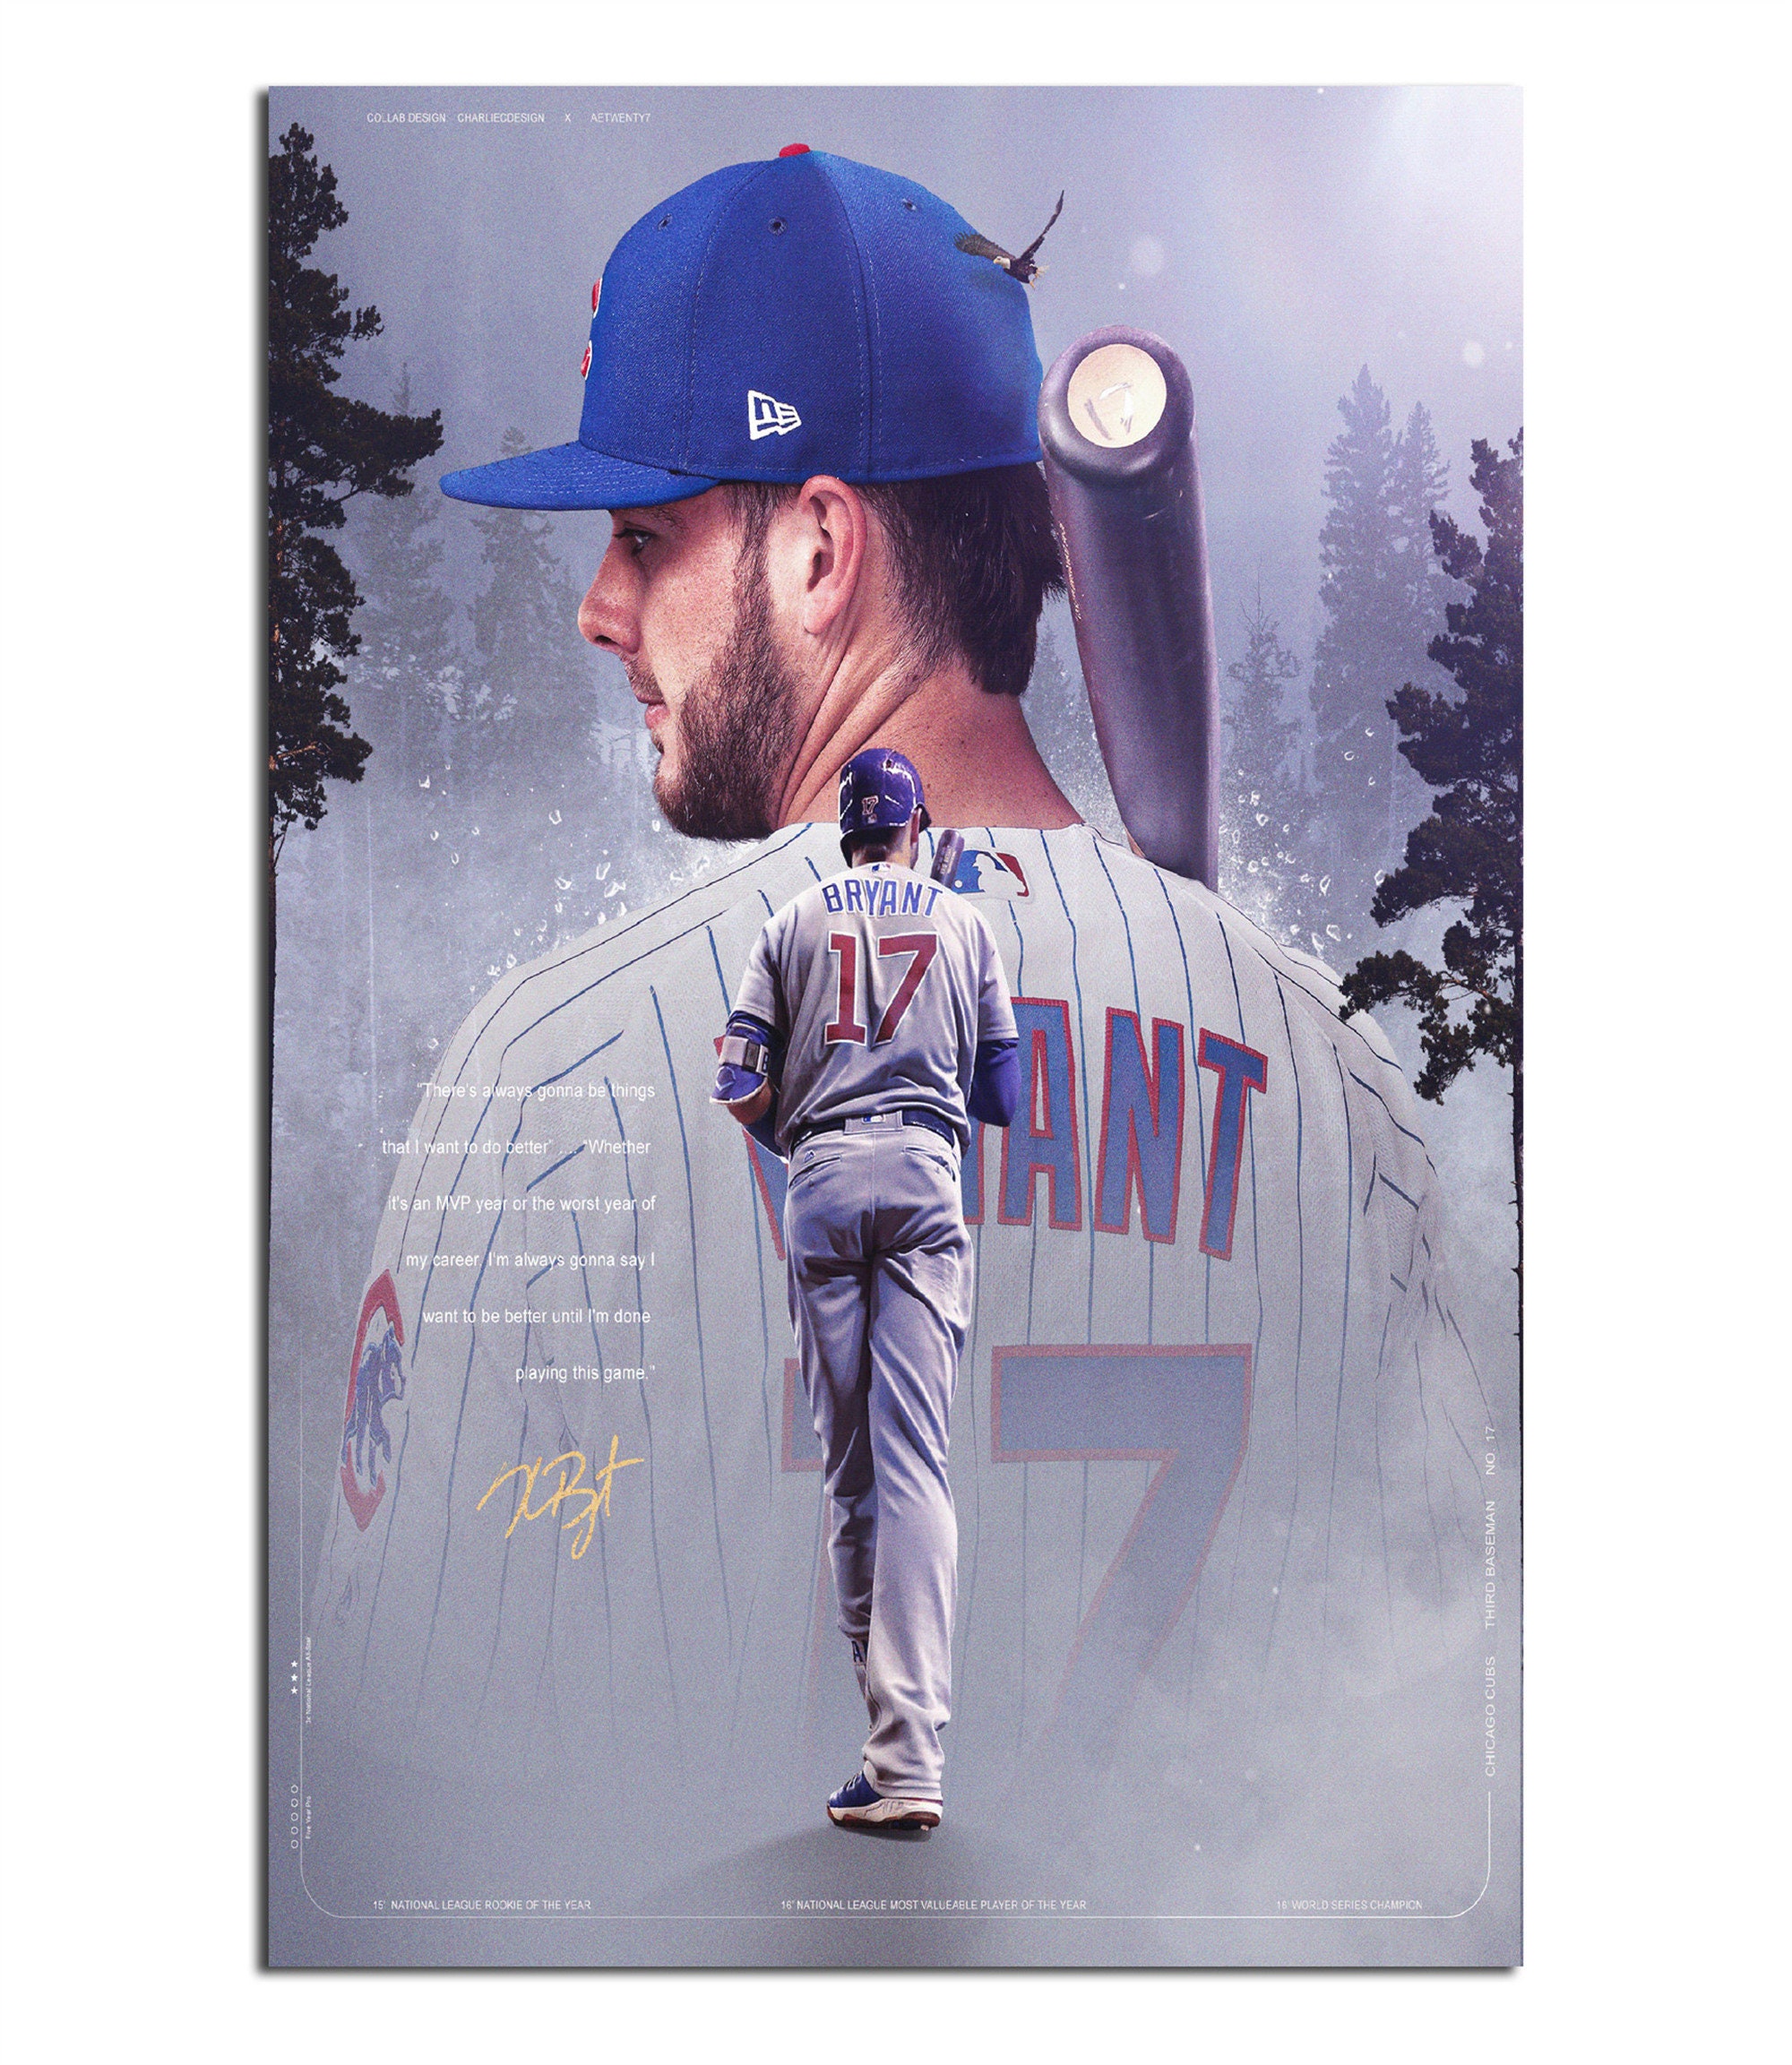 Chicago Cubs' Kris Bryant New Face of Express Men